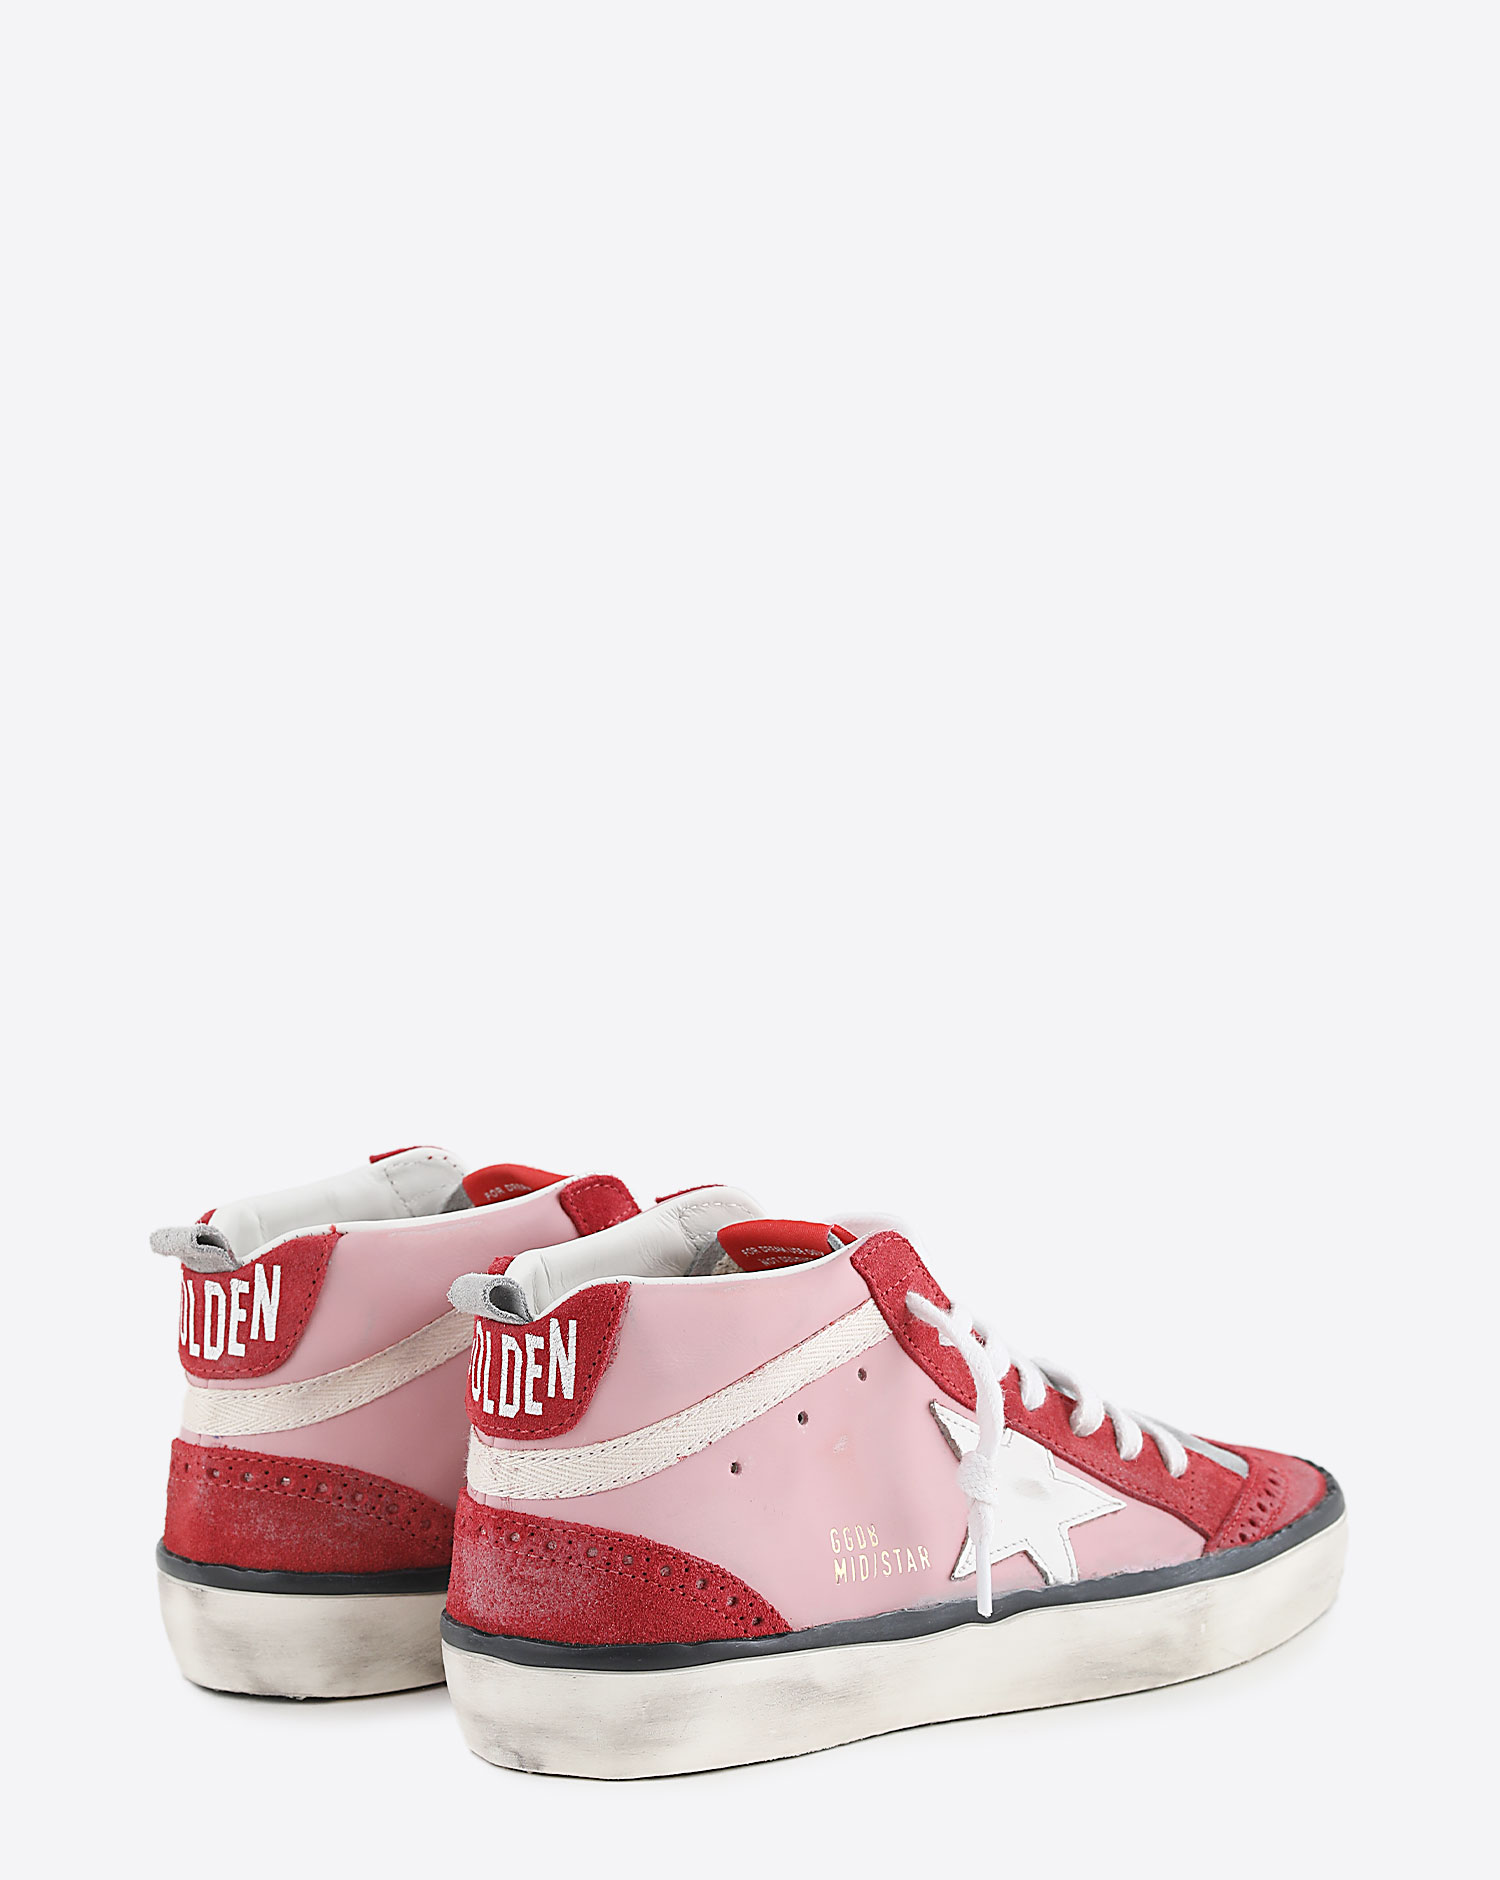 Sneakers Golden Goose  Mid Star Pink Red White 82182 